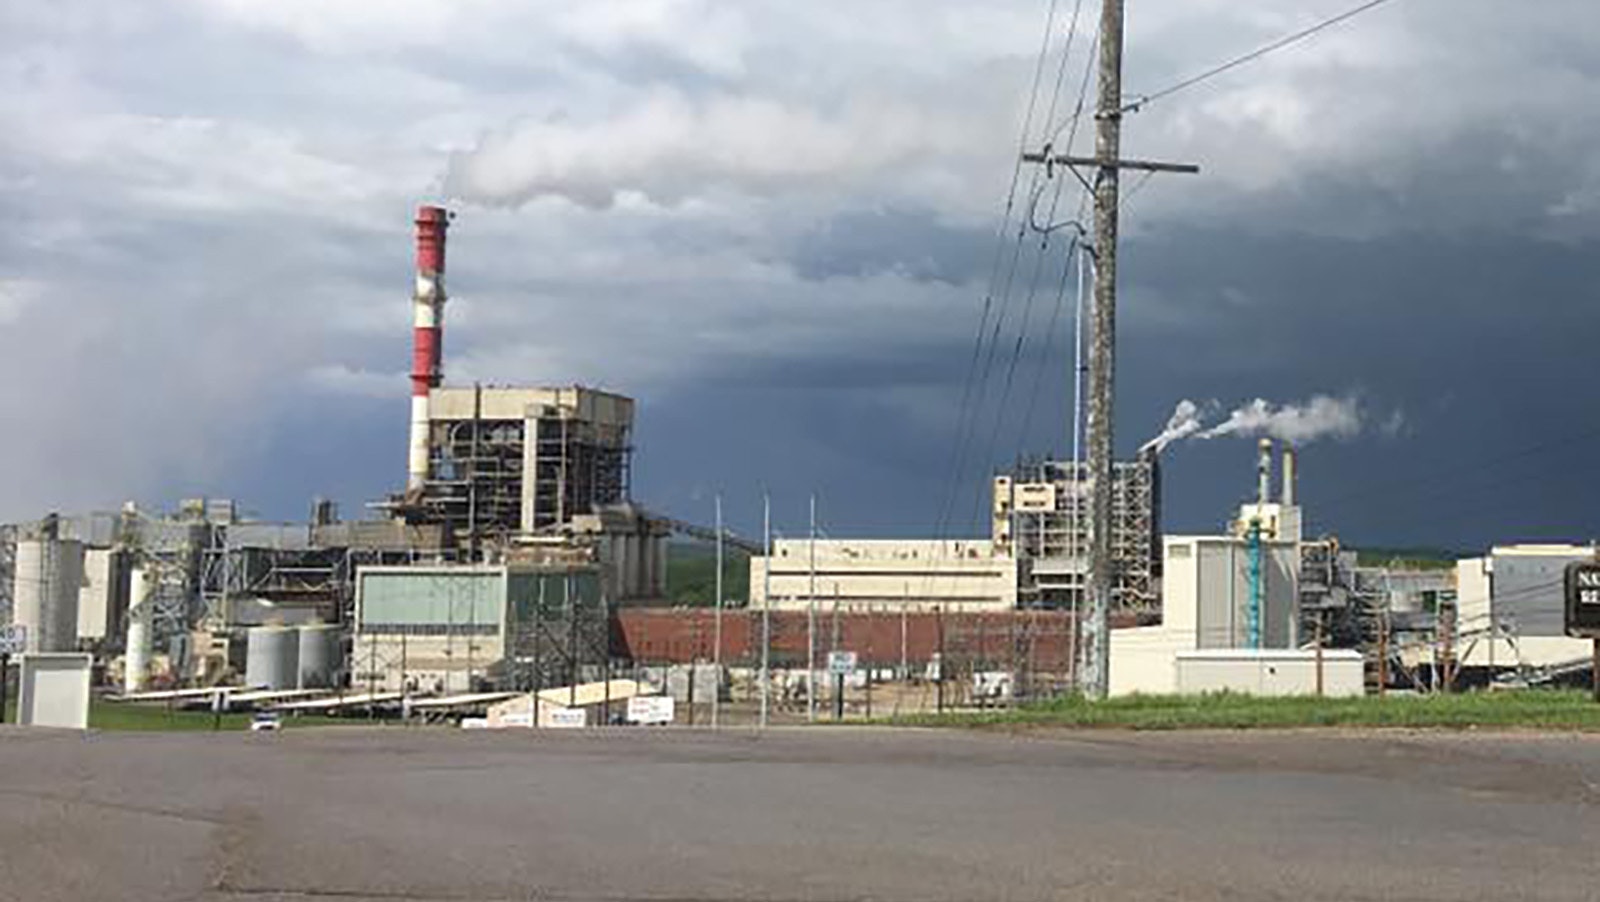 The Lawrence Energy Center in Kansas is a coal-fired power plant that will extend its life to power a new EV battery facility.